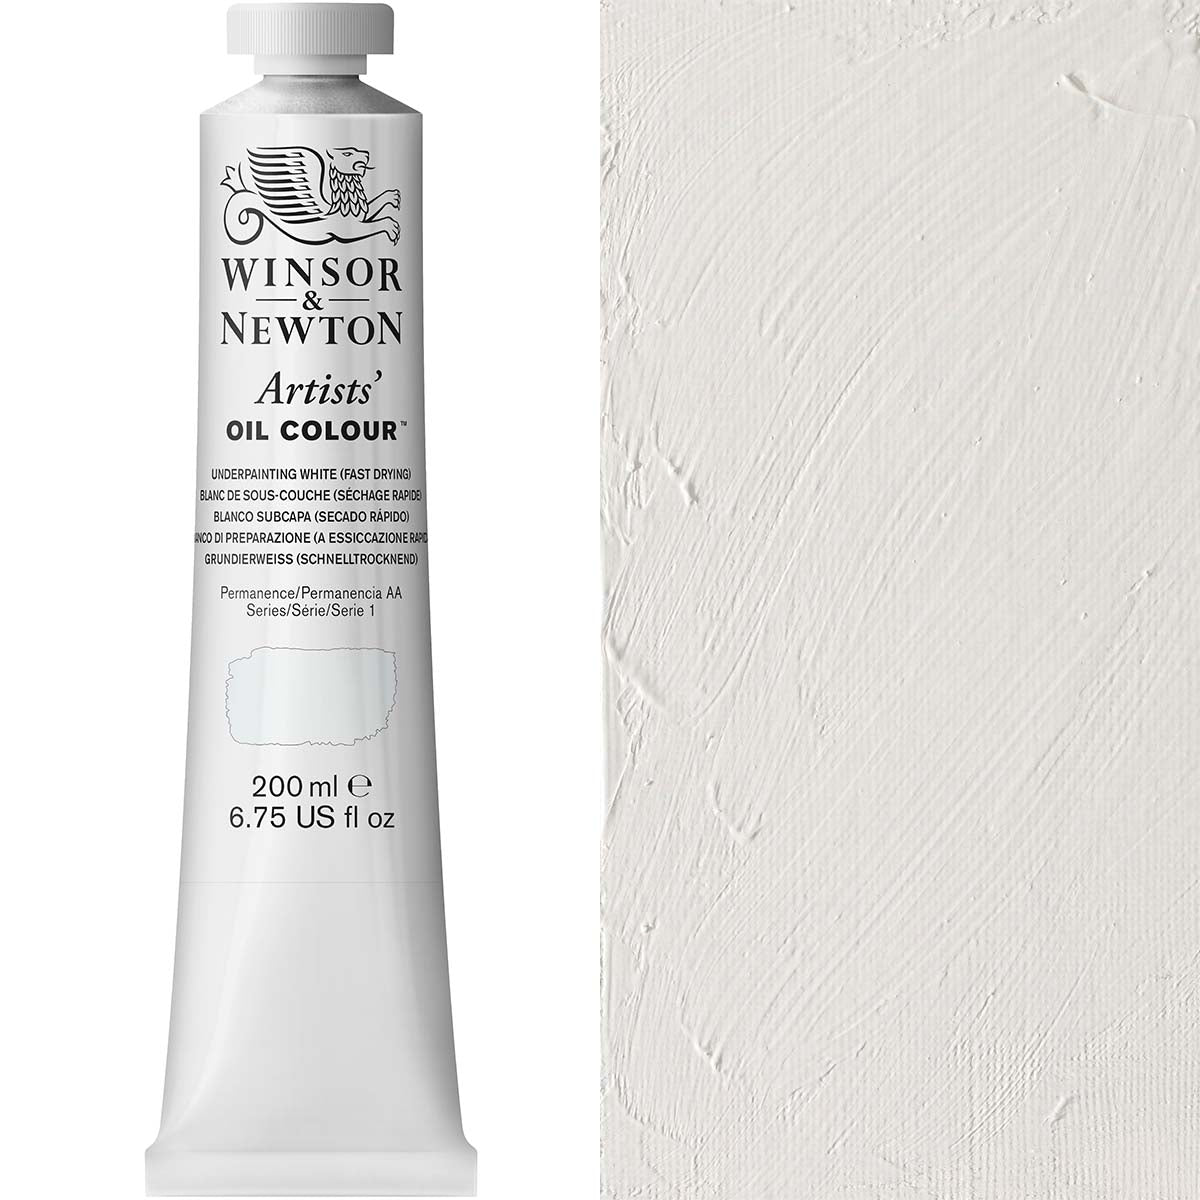 Winsor and Newton - Artists' Oil Colour - 200ml - Underpainting White